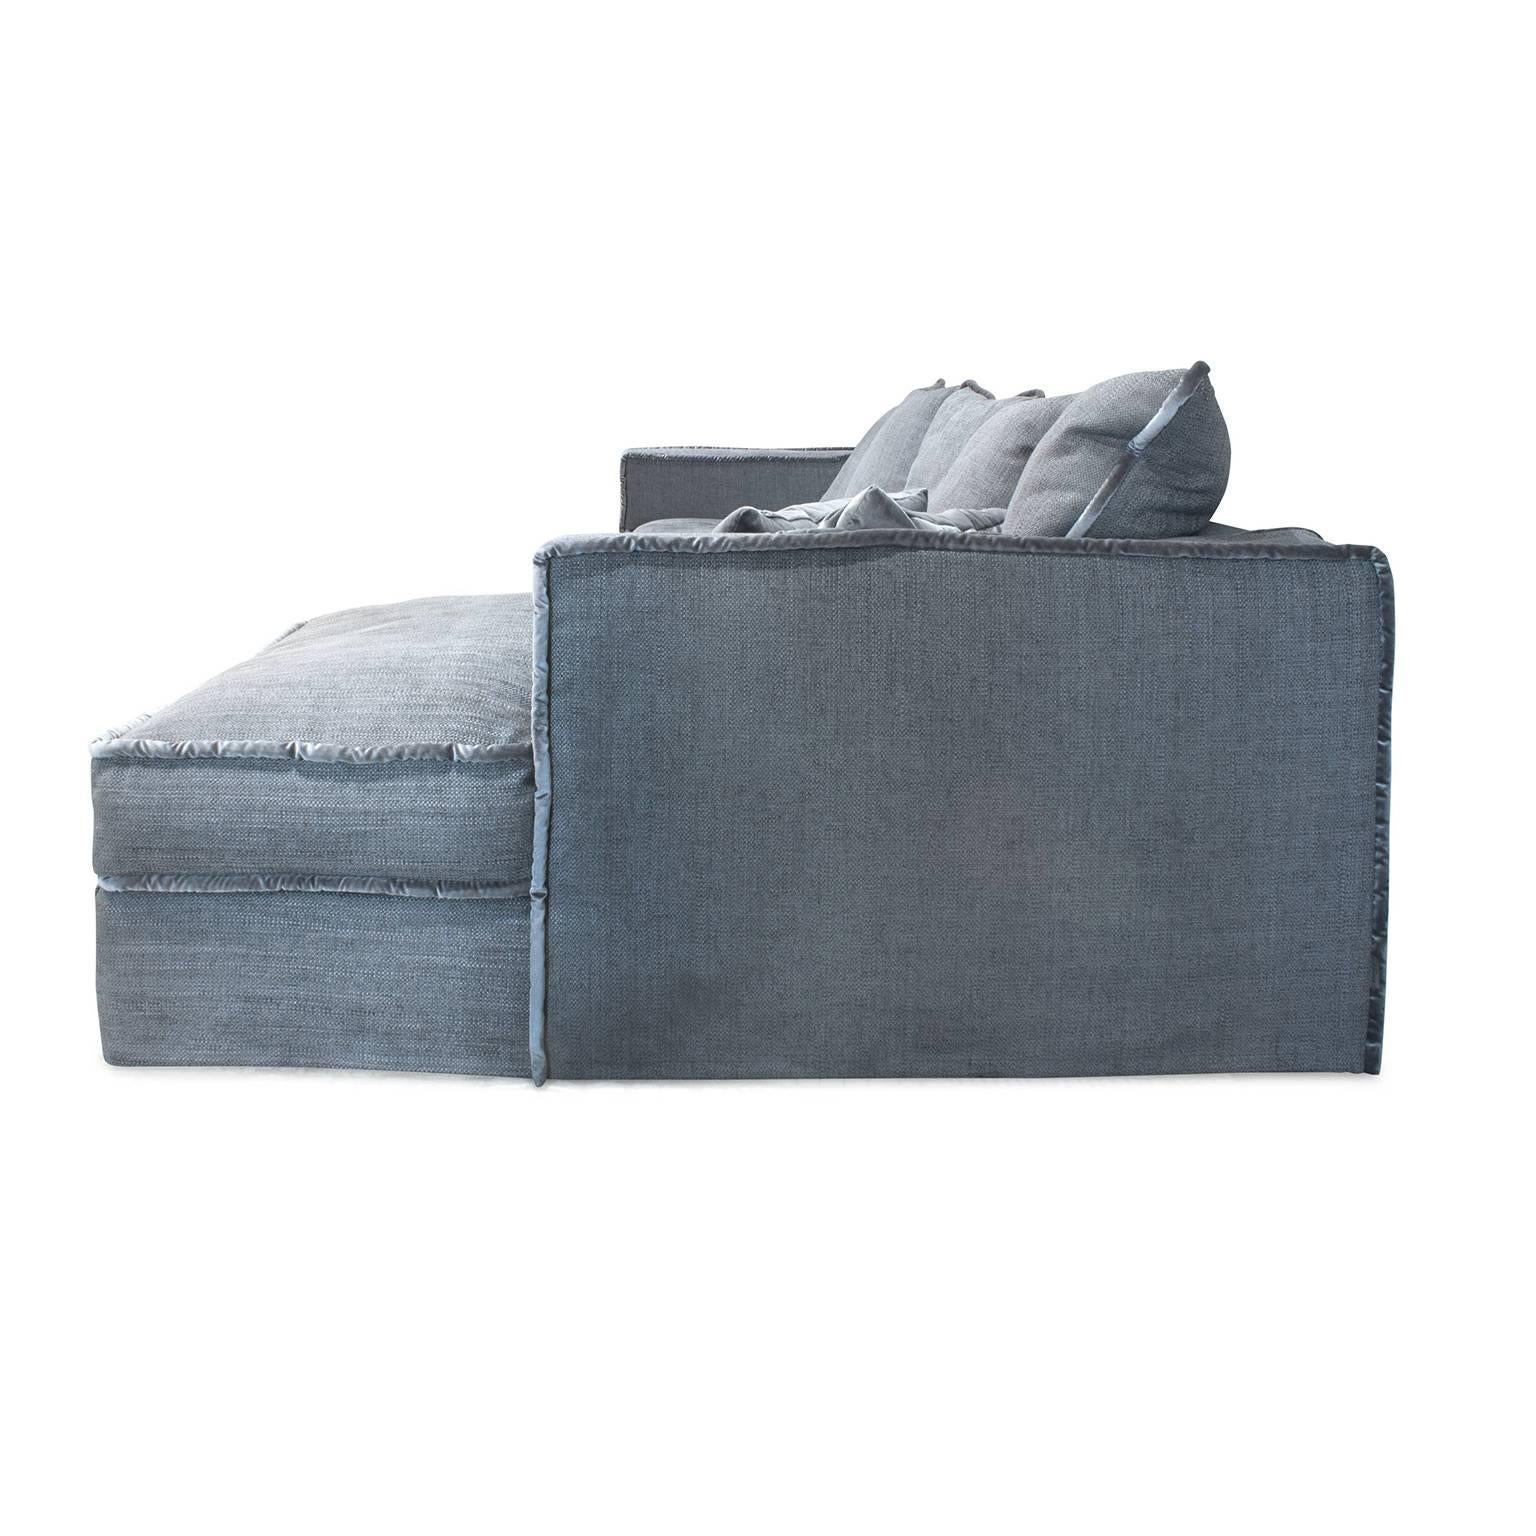 Pillopipe Sofa with Chaise by Paola Navone for Casamilano, Italy In Good Condition For Sale In Brooklyn, NY